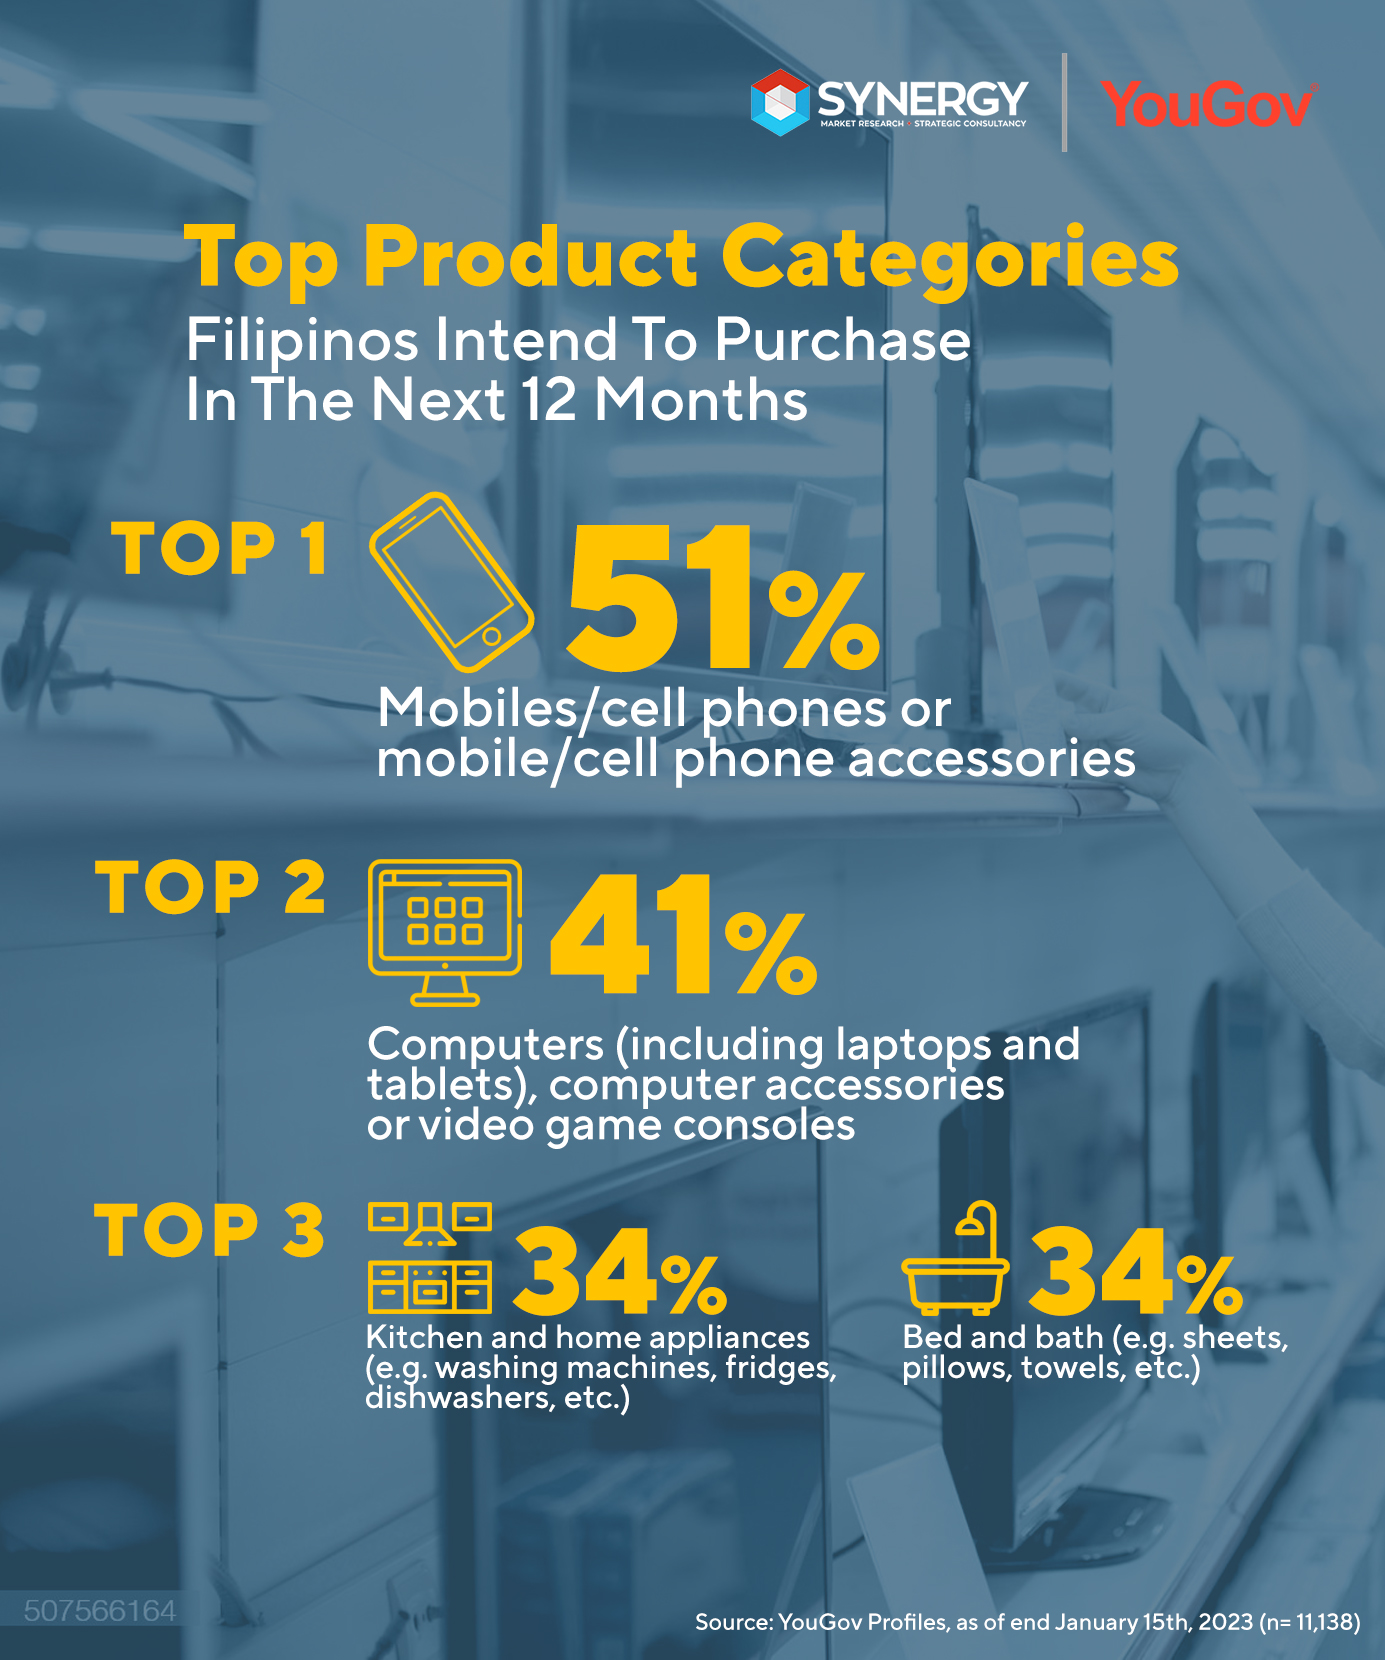 Top Product Categories